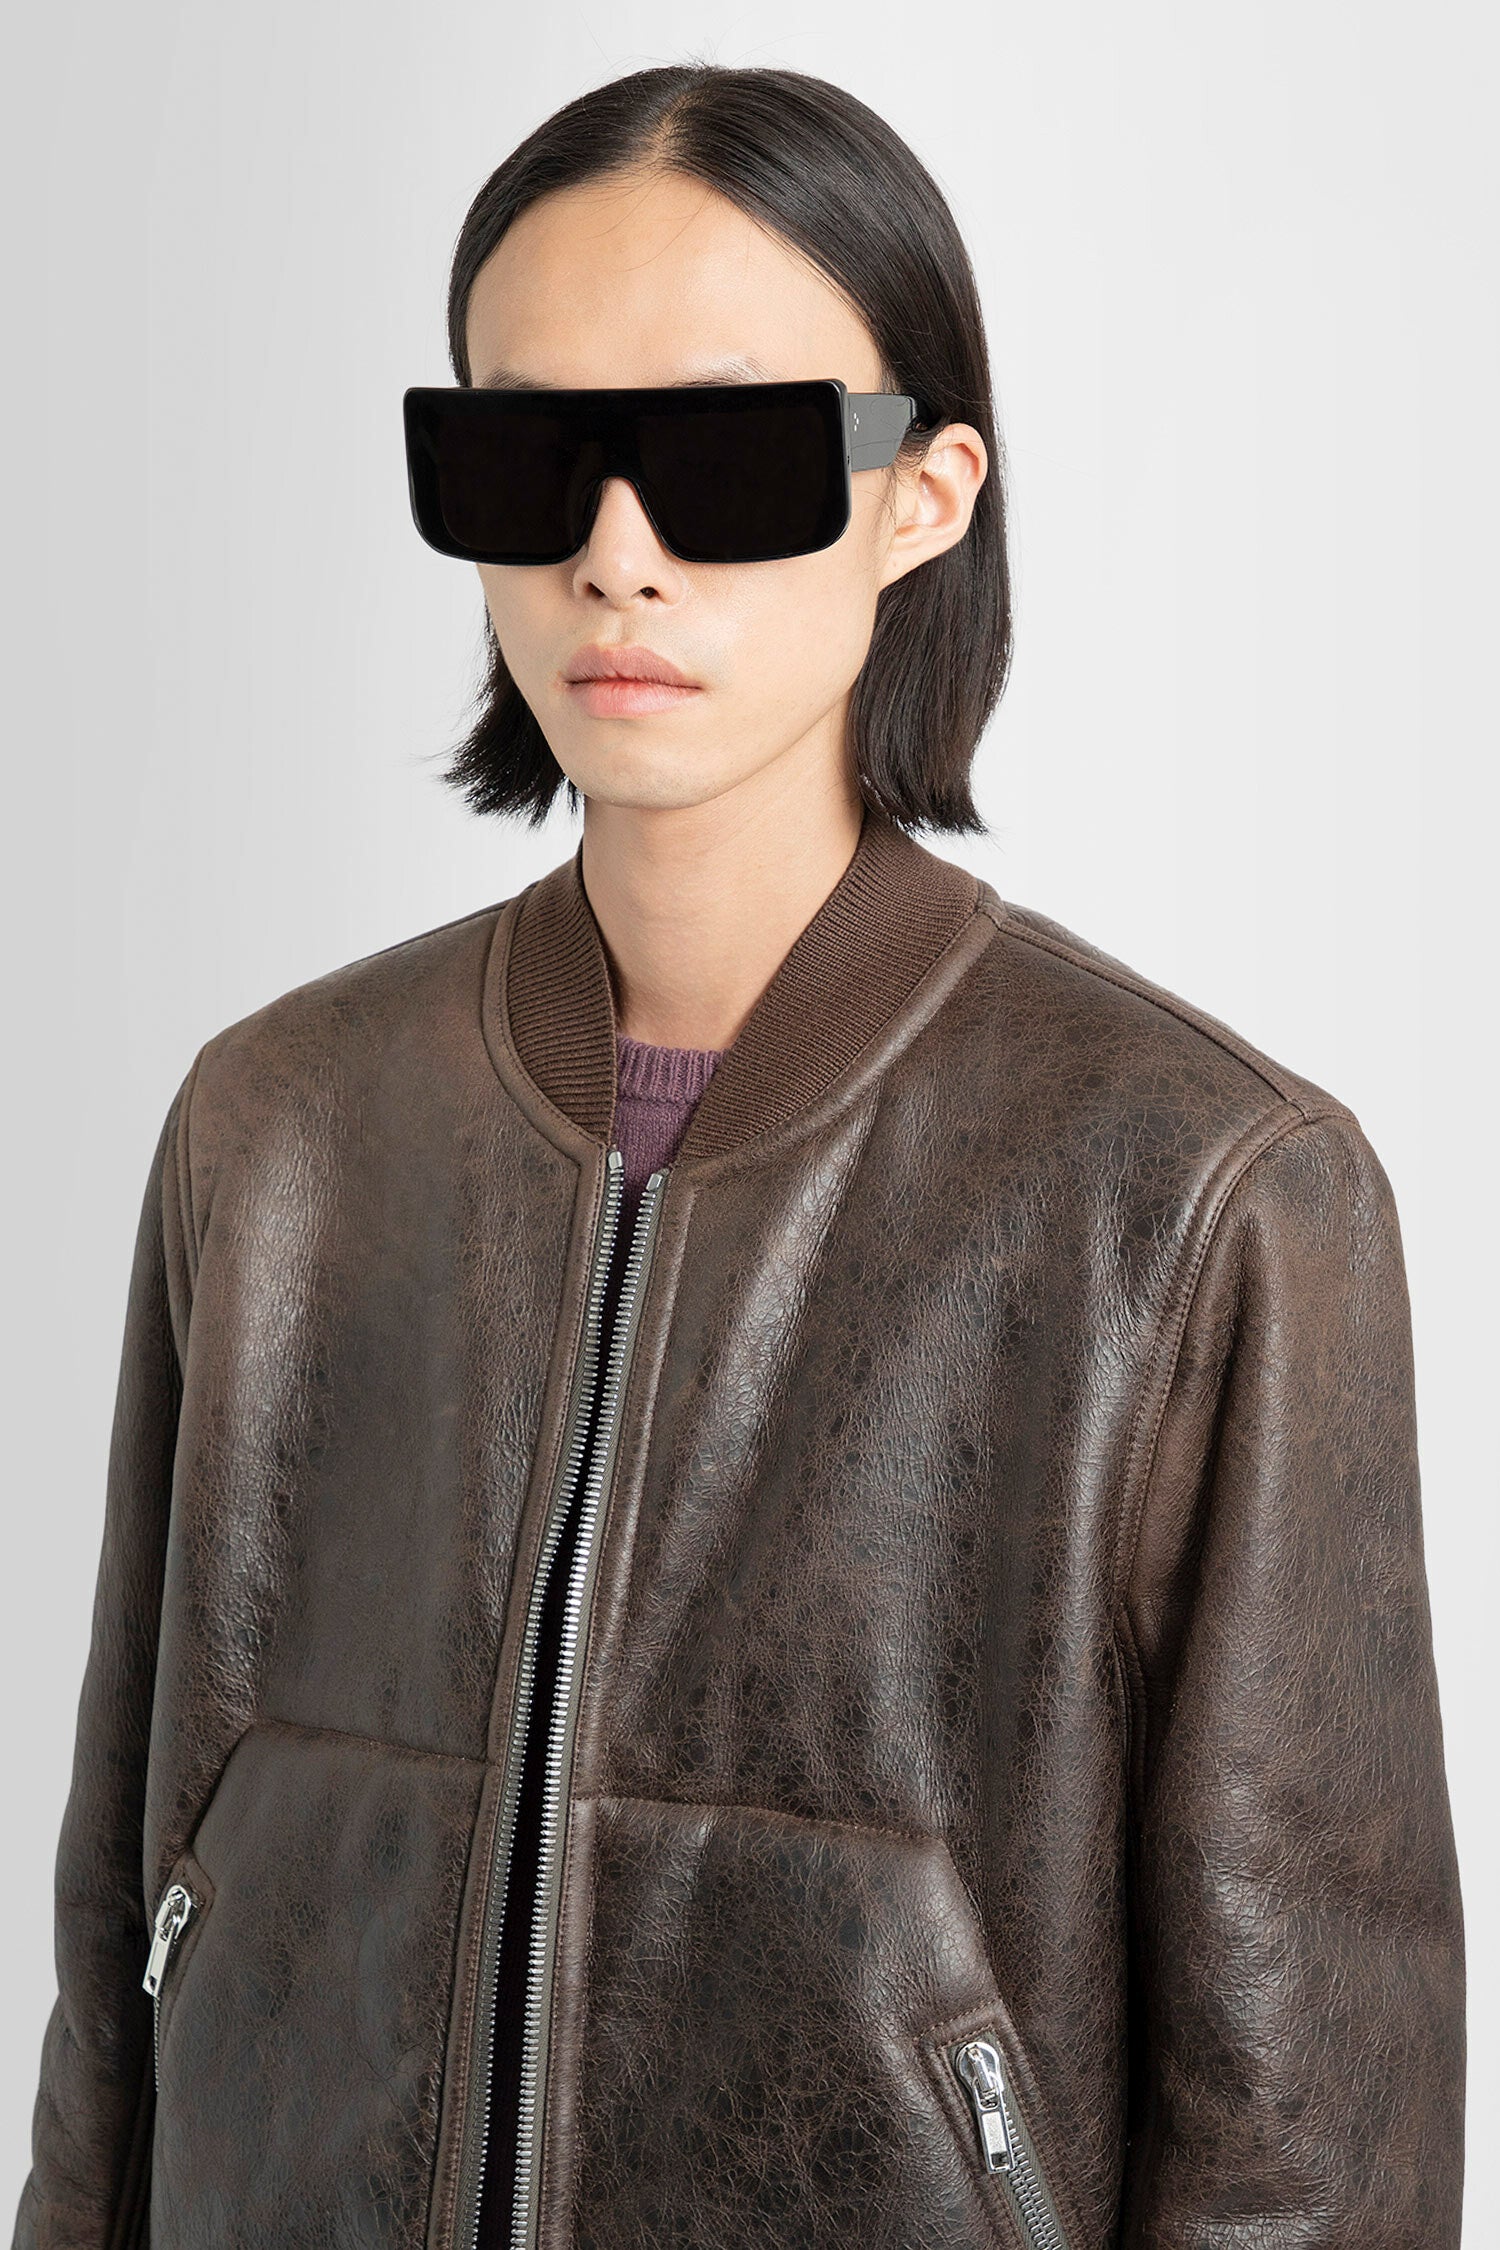 RICK OWENS MAN BROWN LEATHER JACKETS